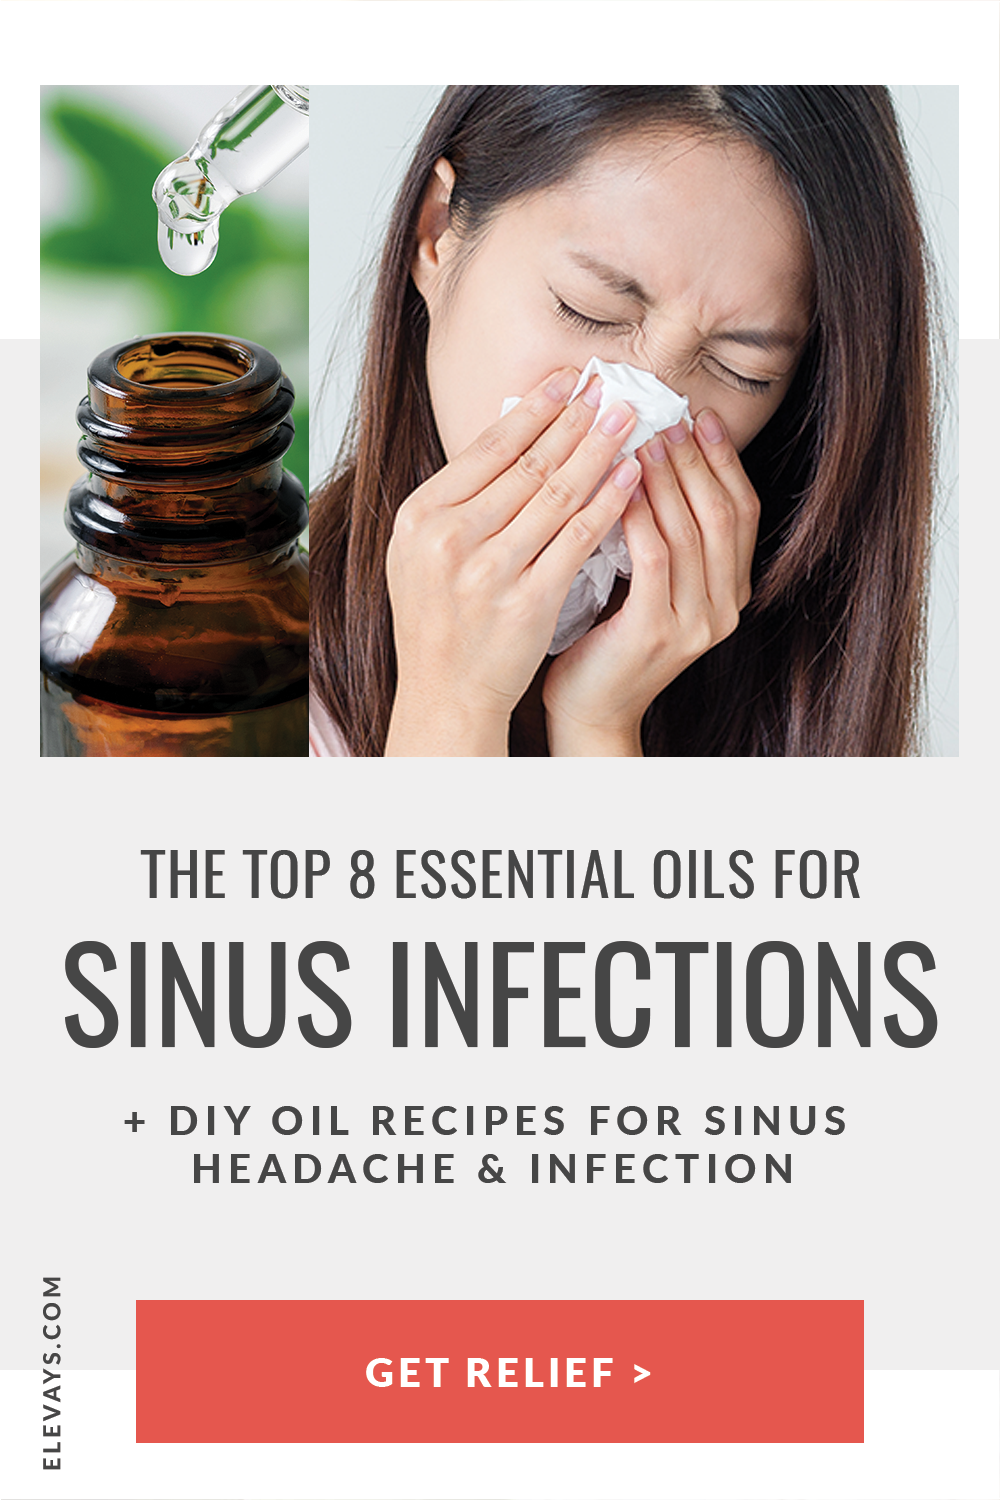 Top 8 Essential Oils for Sinus Infections